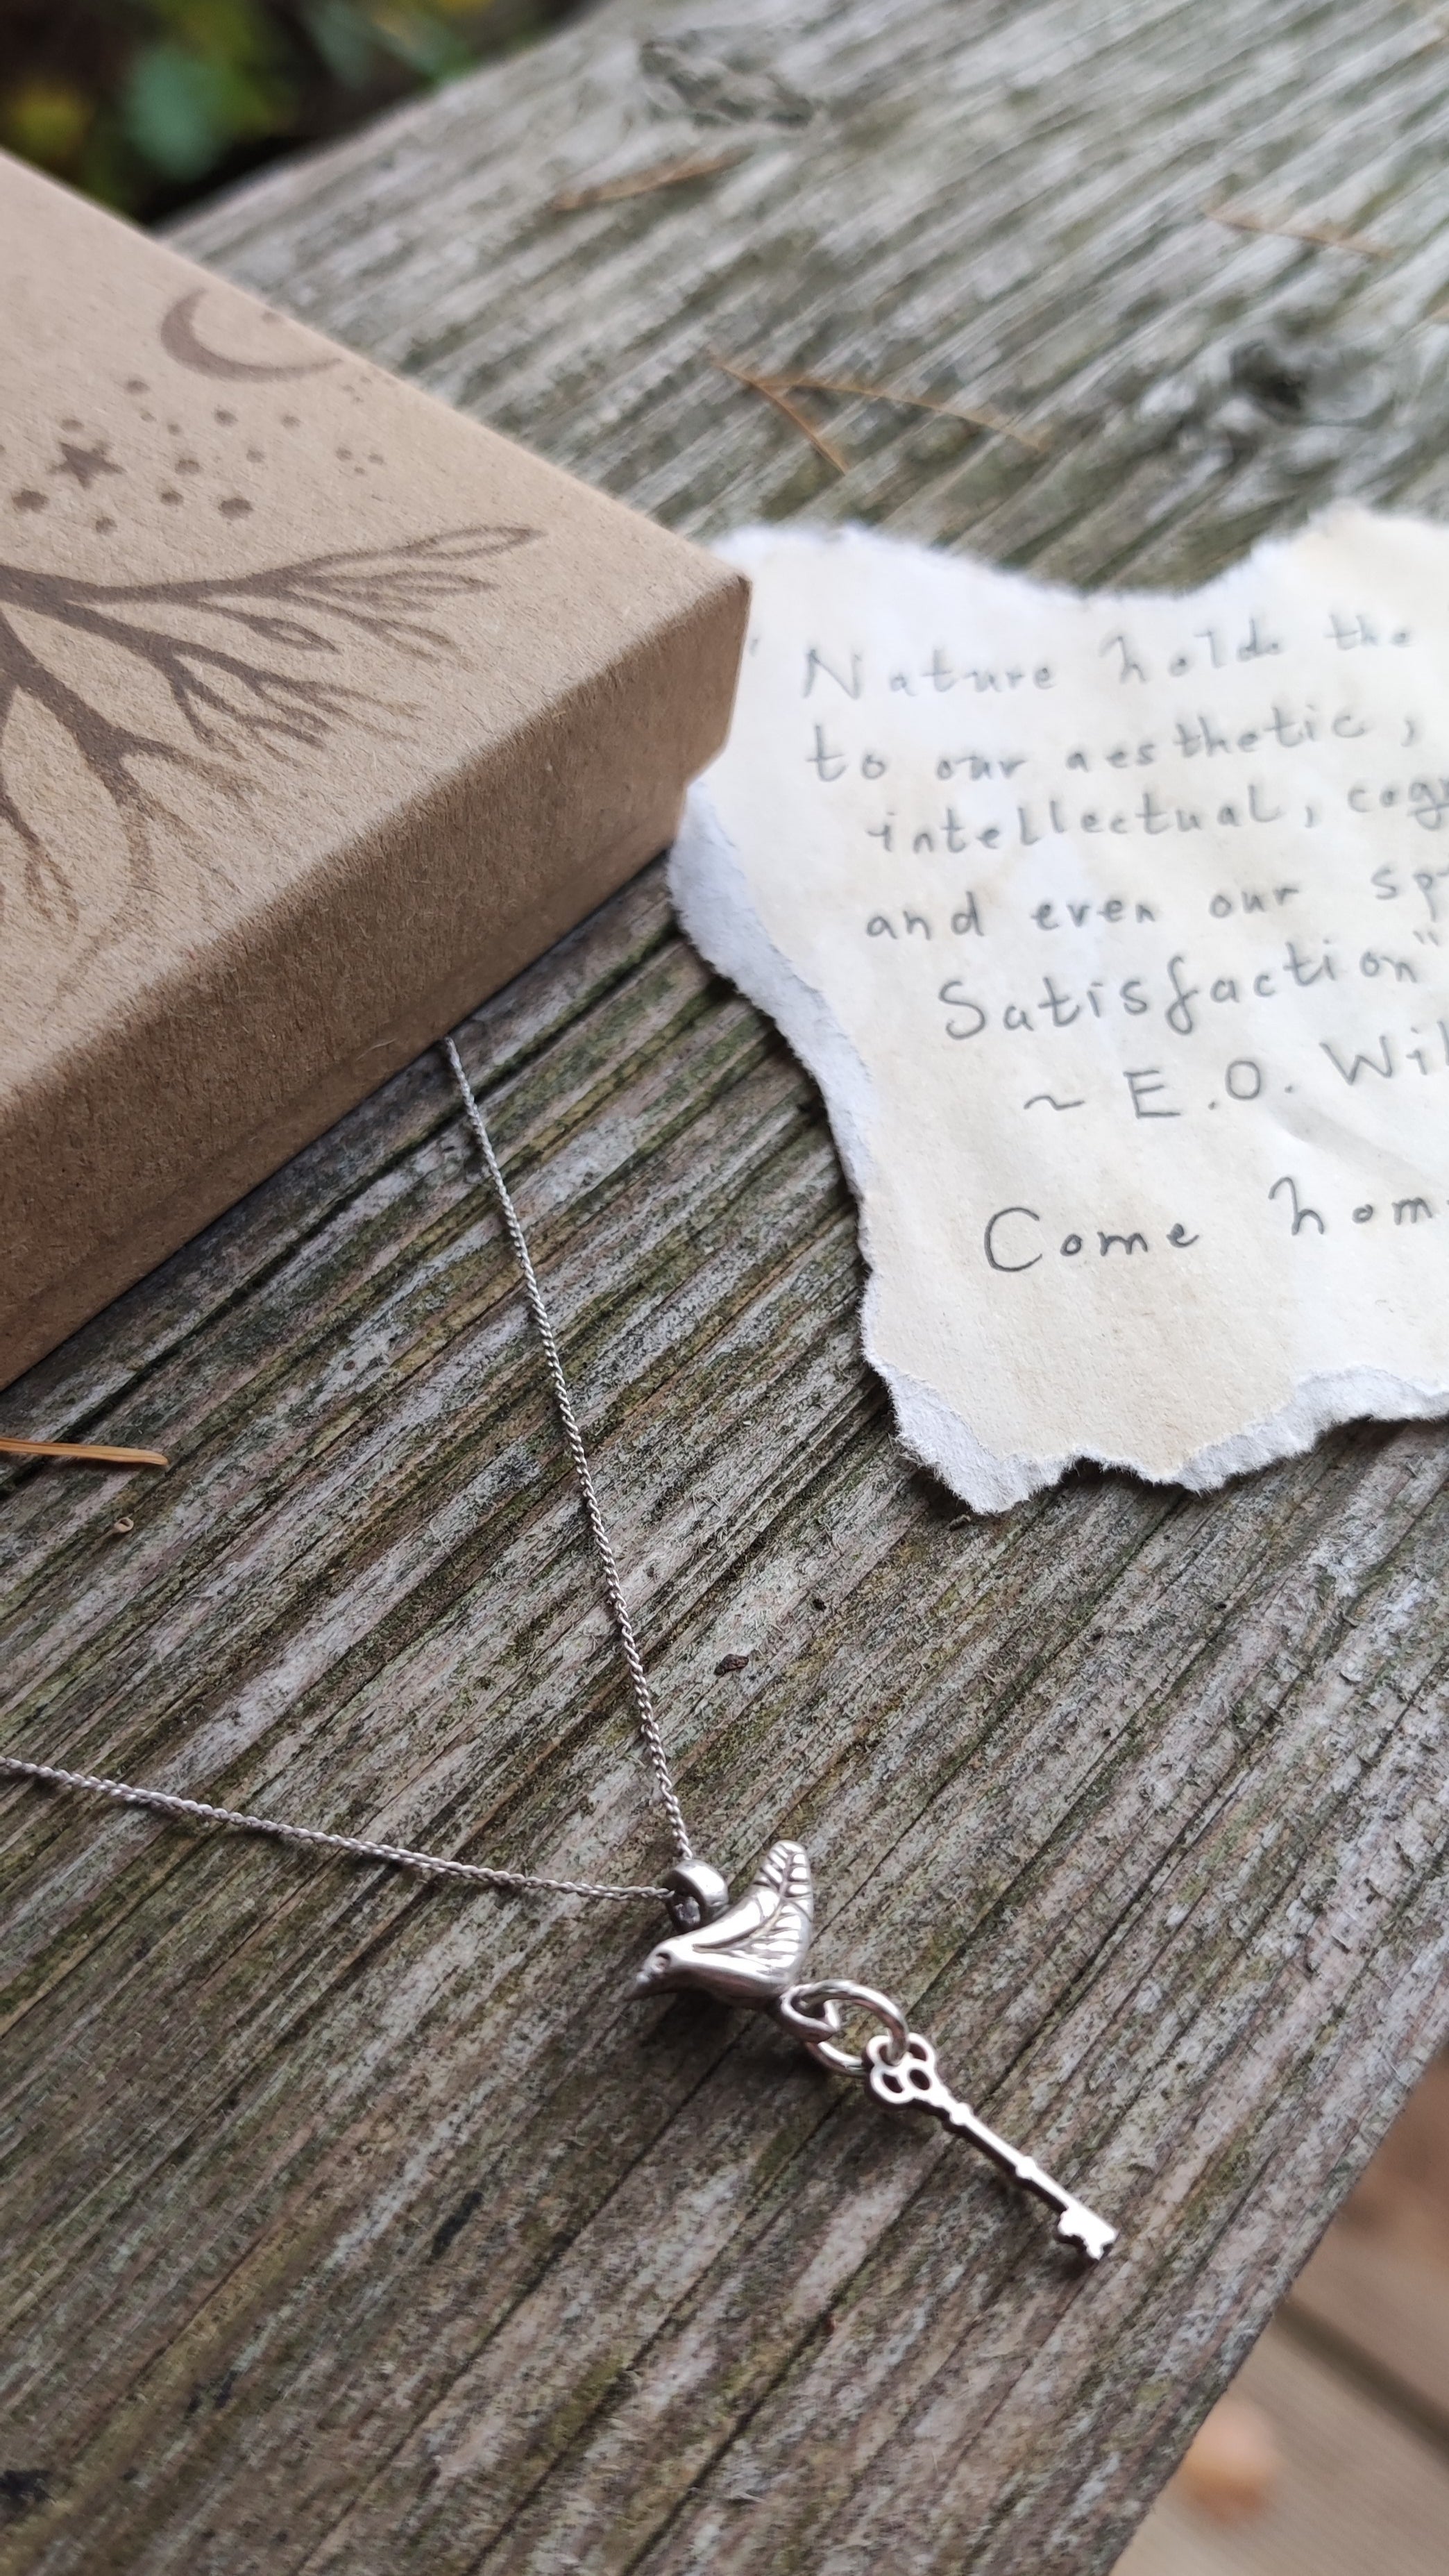 'Nature holds the Key' Silver pendant